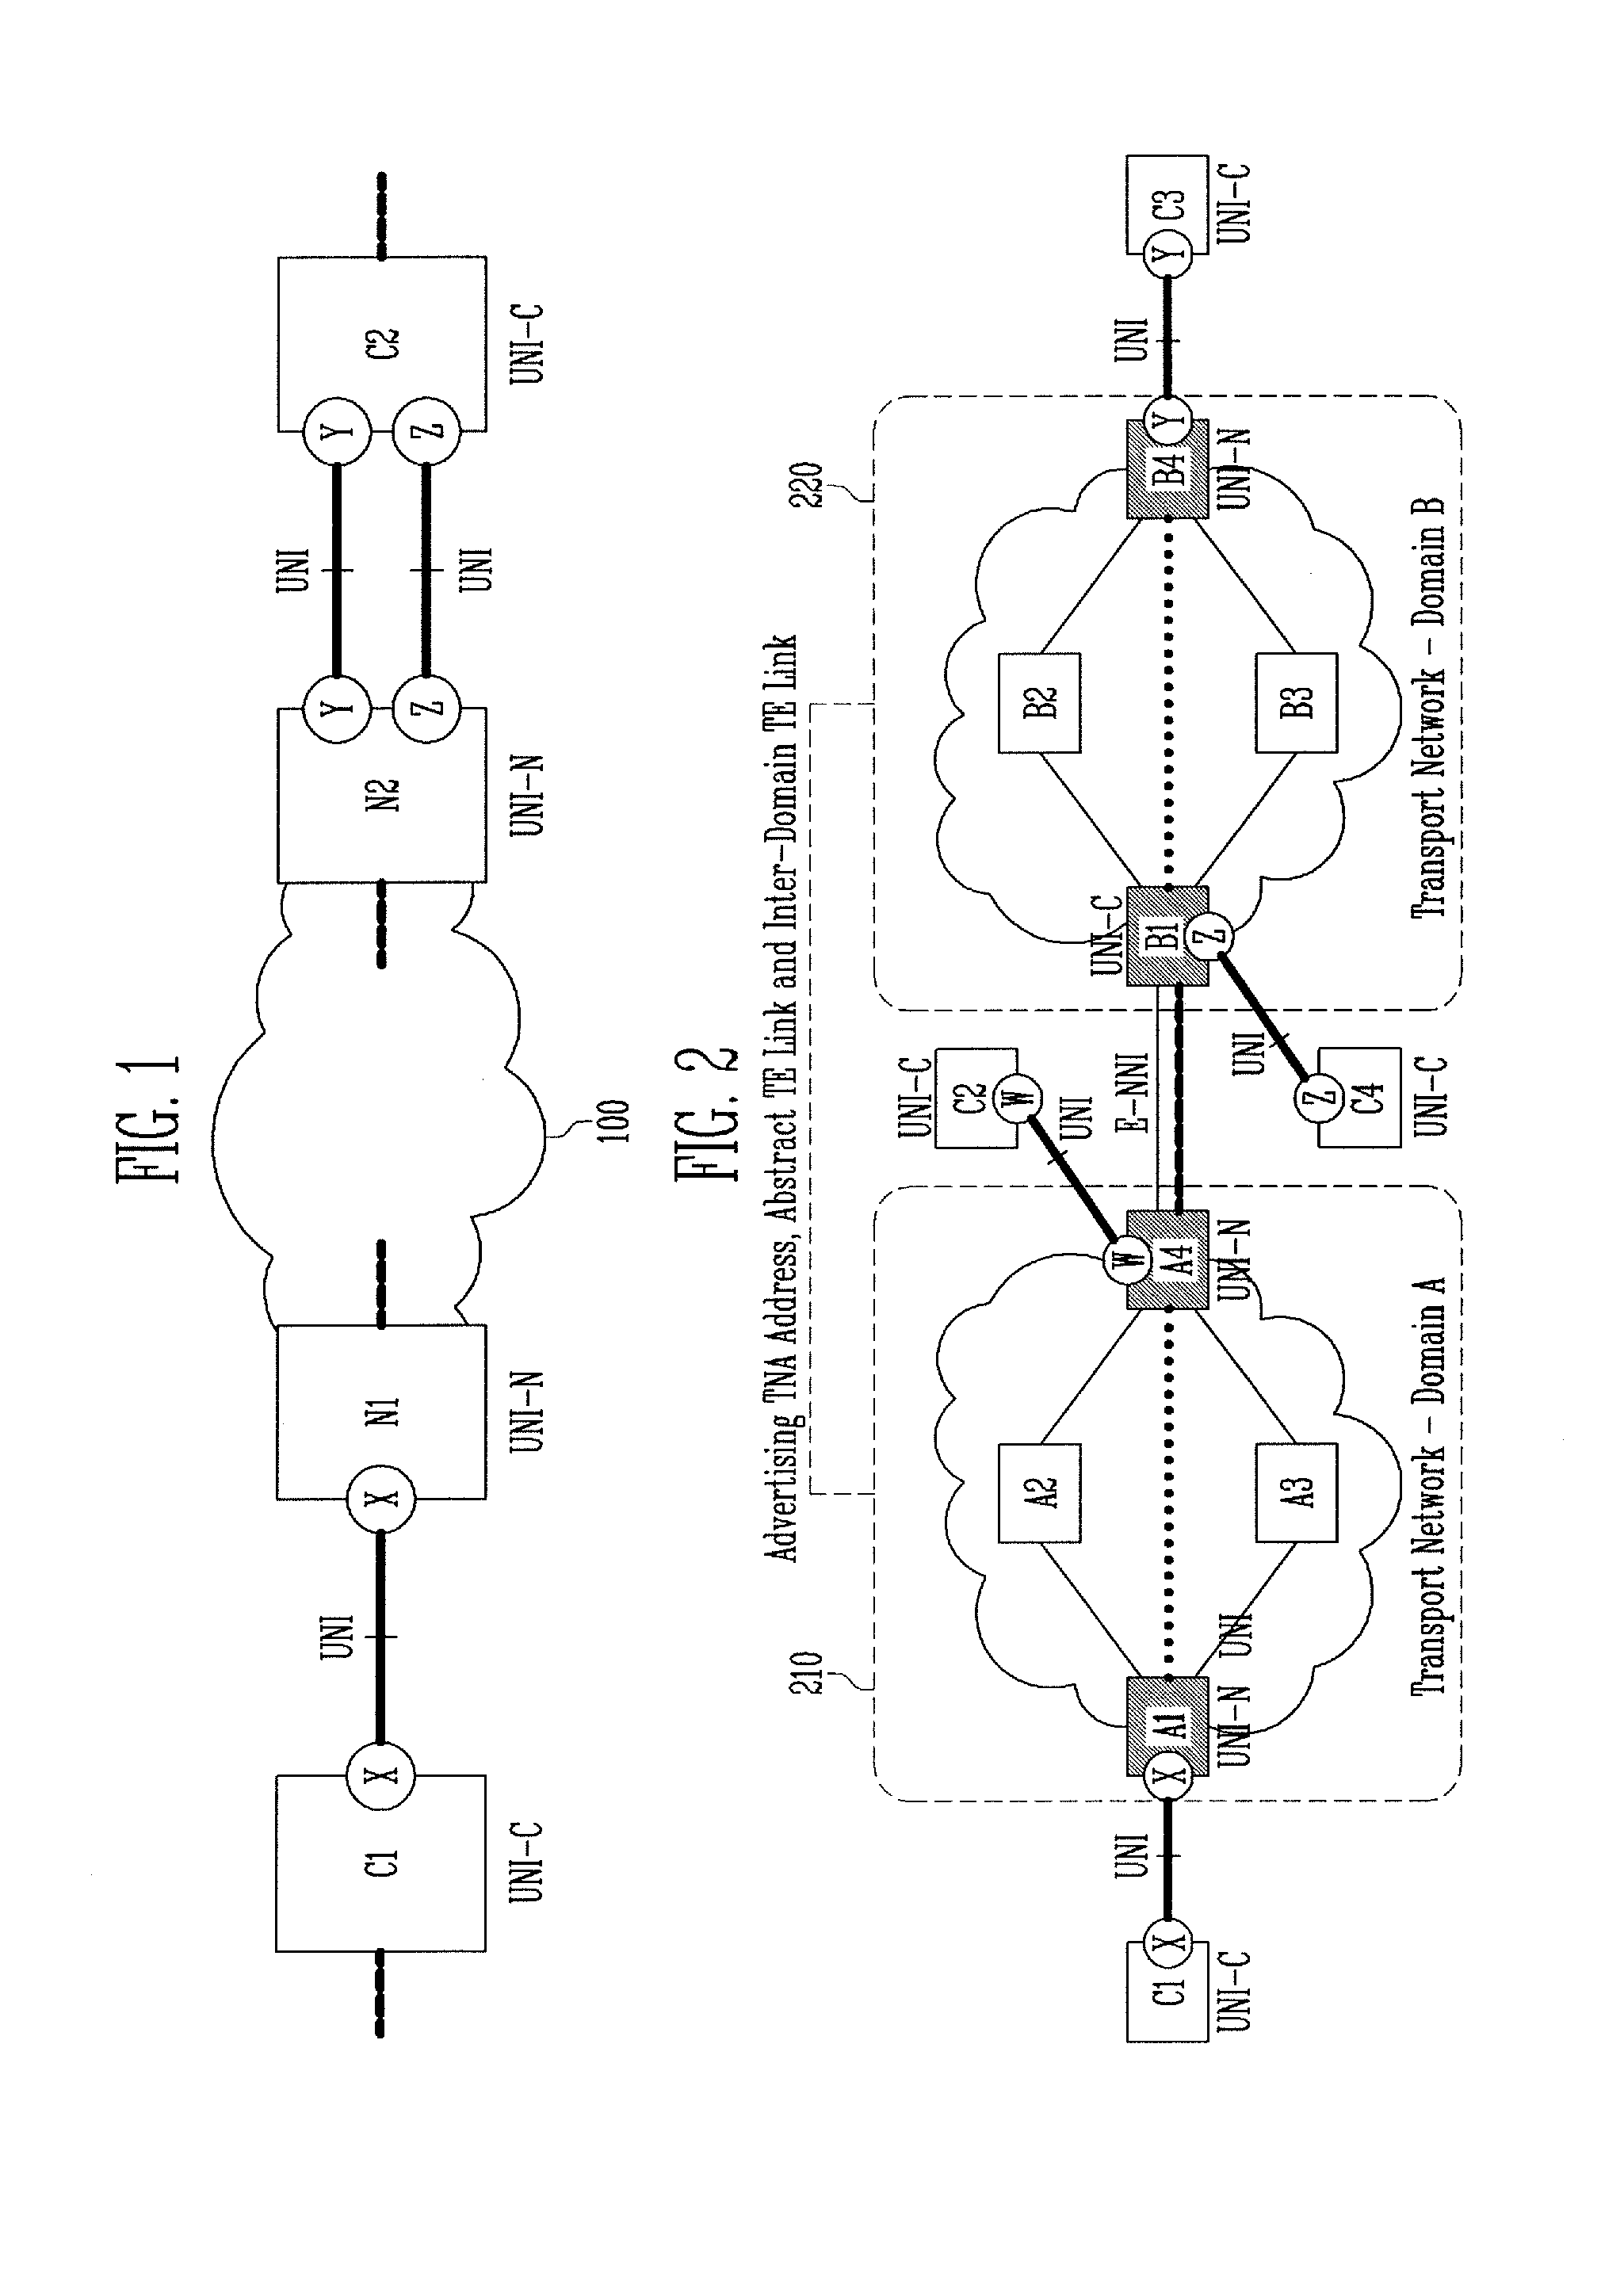 Path computation element and method for setting path of user network interface